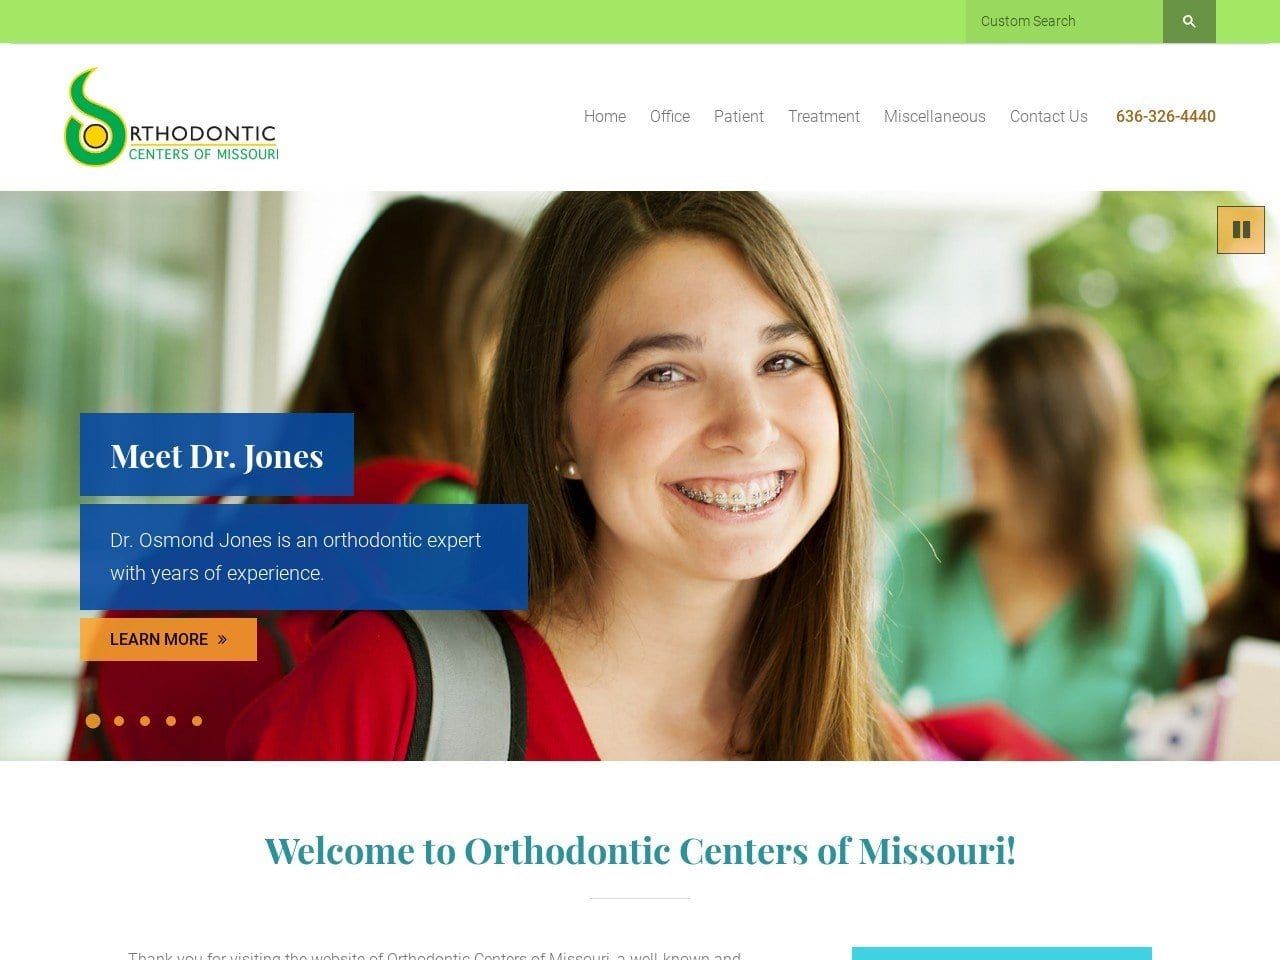 Orthodontic Centers of Missouri Website Screenshot from orthocentersofmo.com